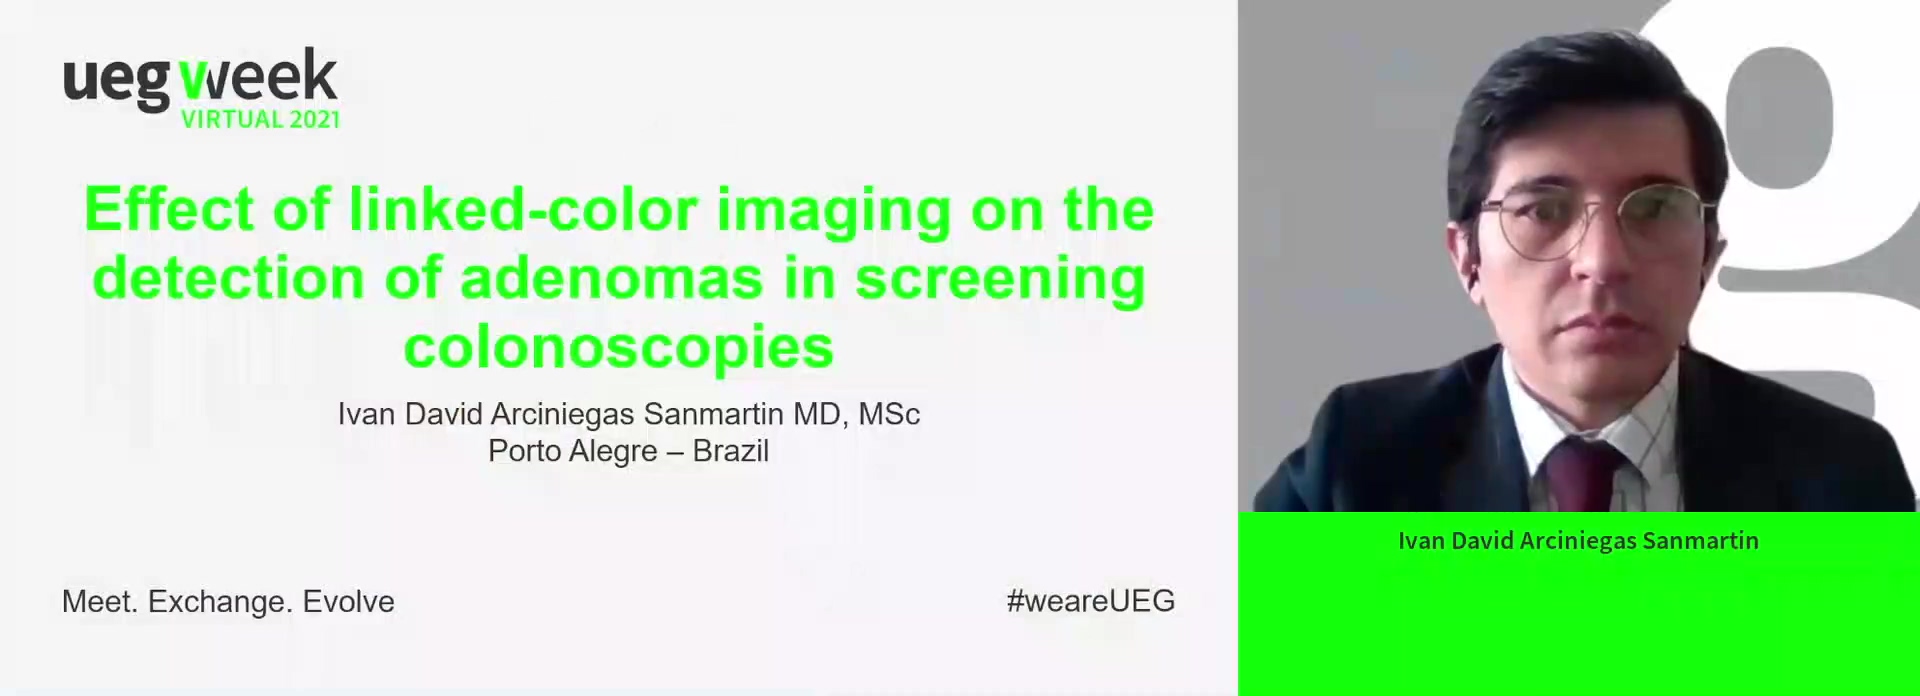 EFFECT OF LINKED-COLOR IMAGING ON THE DETECTION OF ADENOMAS IN SCREENING COLONOSCOPIES